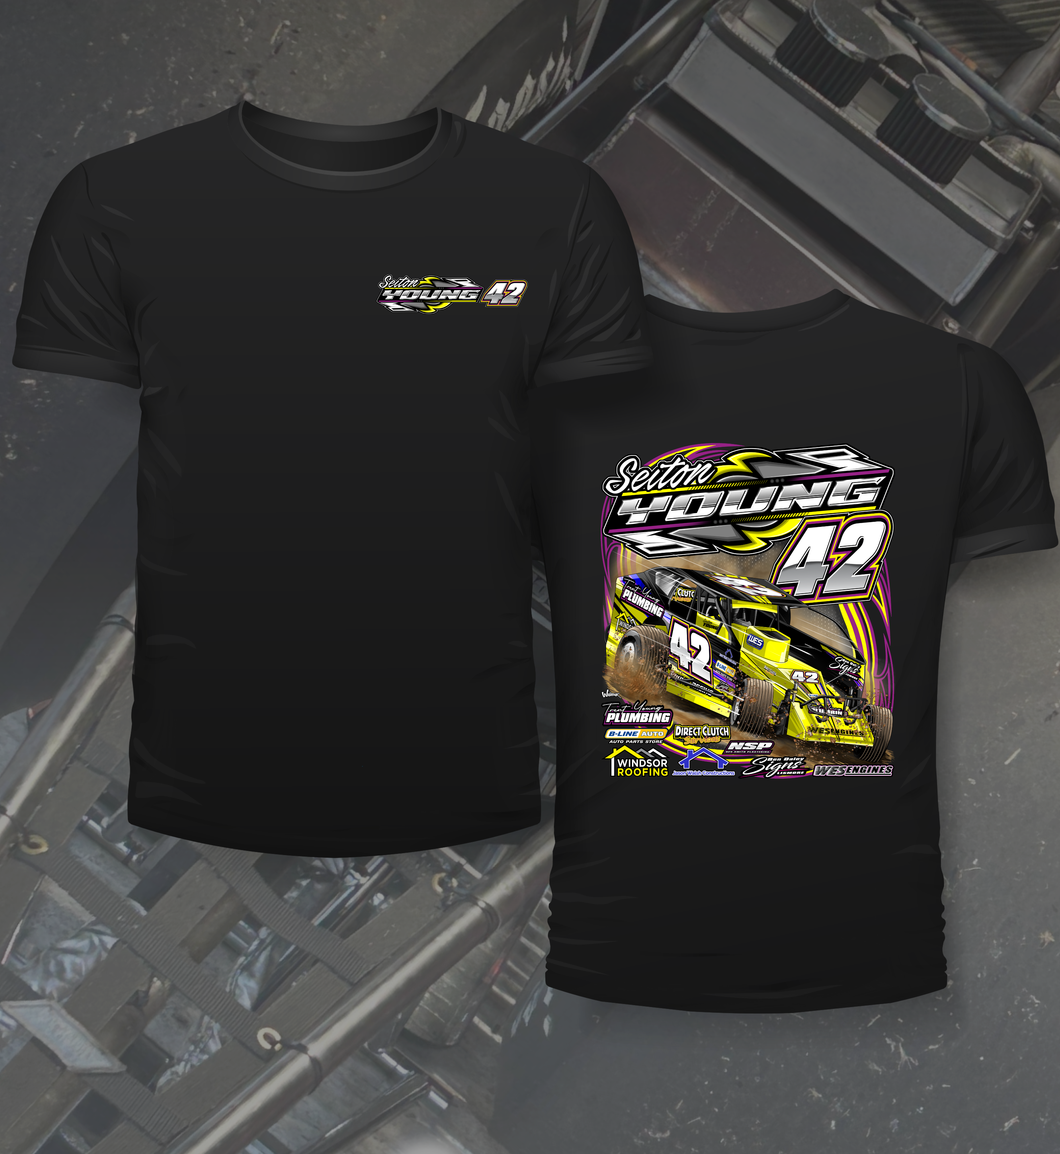 Seiton Young - Dirt Modified - Two Position Print Tee Shirt